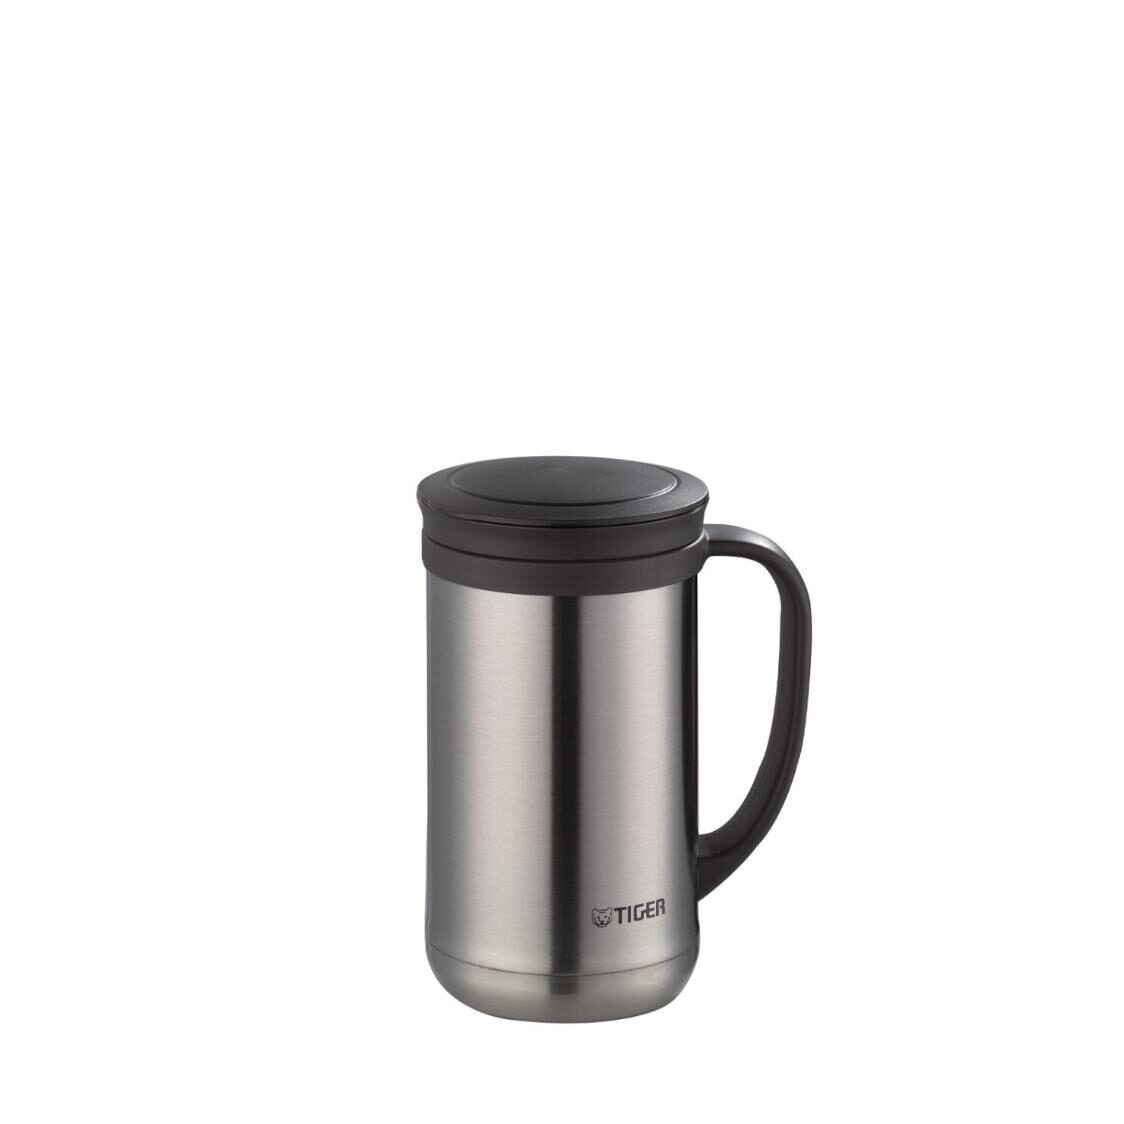 Tiger 500ml Double Stainless Steel Mug With Tea Strainer Clear Stainless MCM-T050-XC